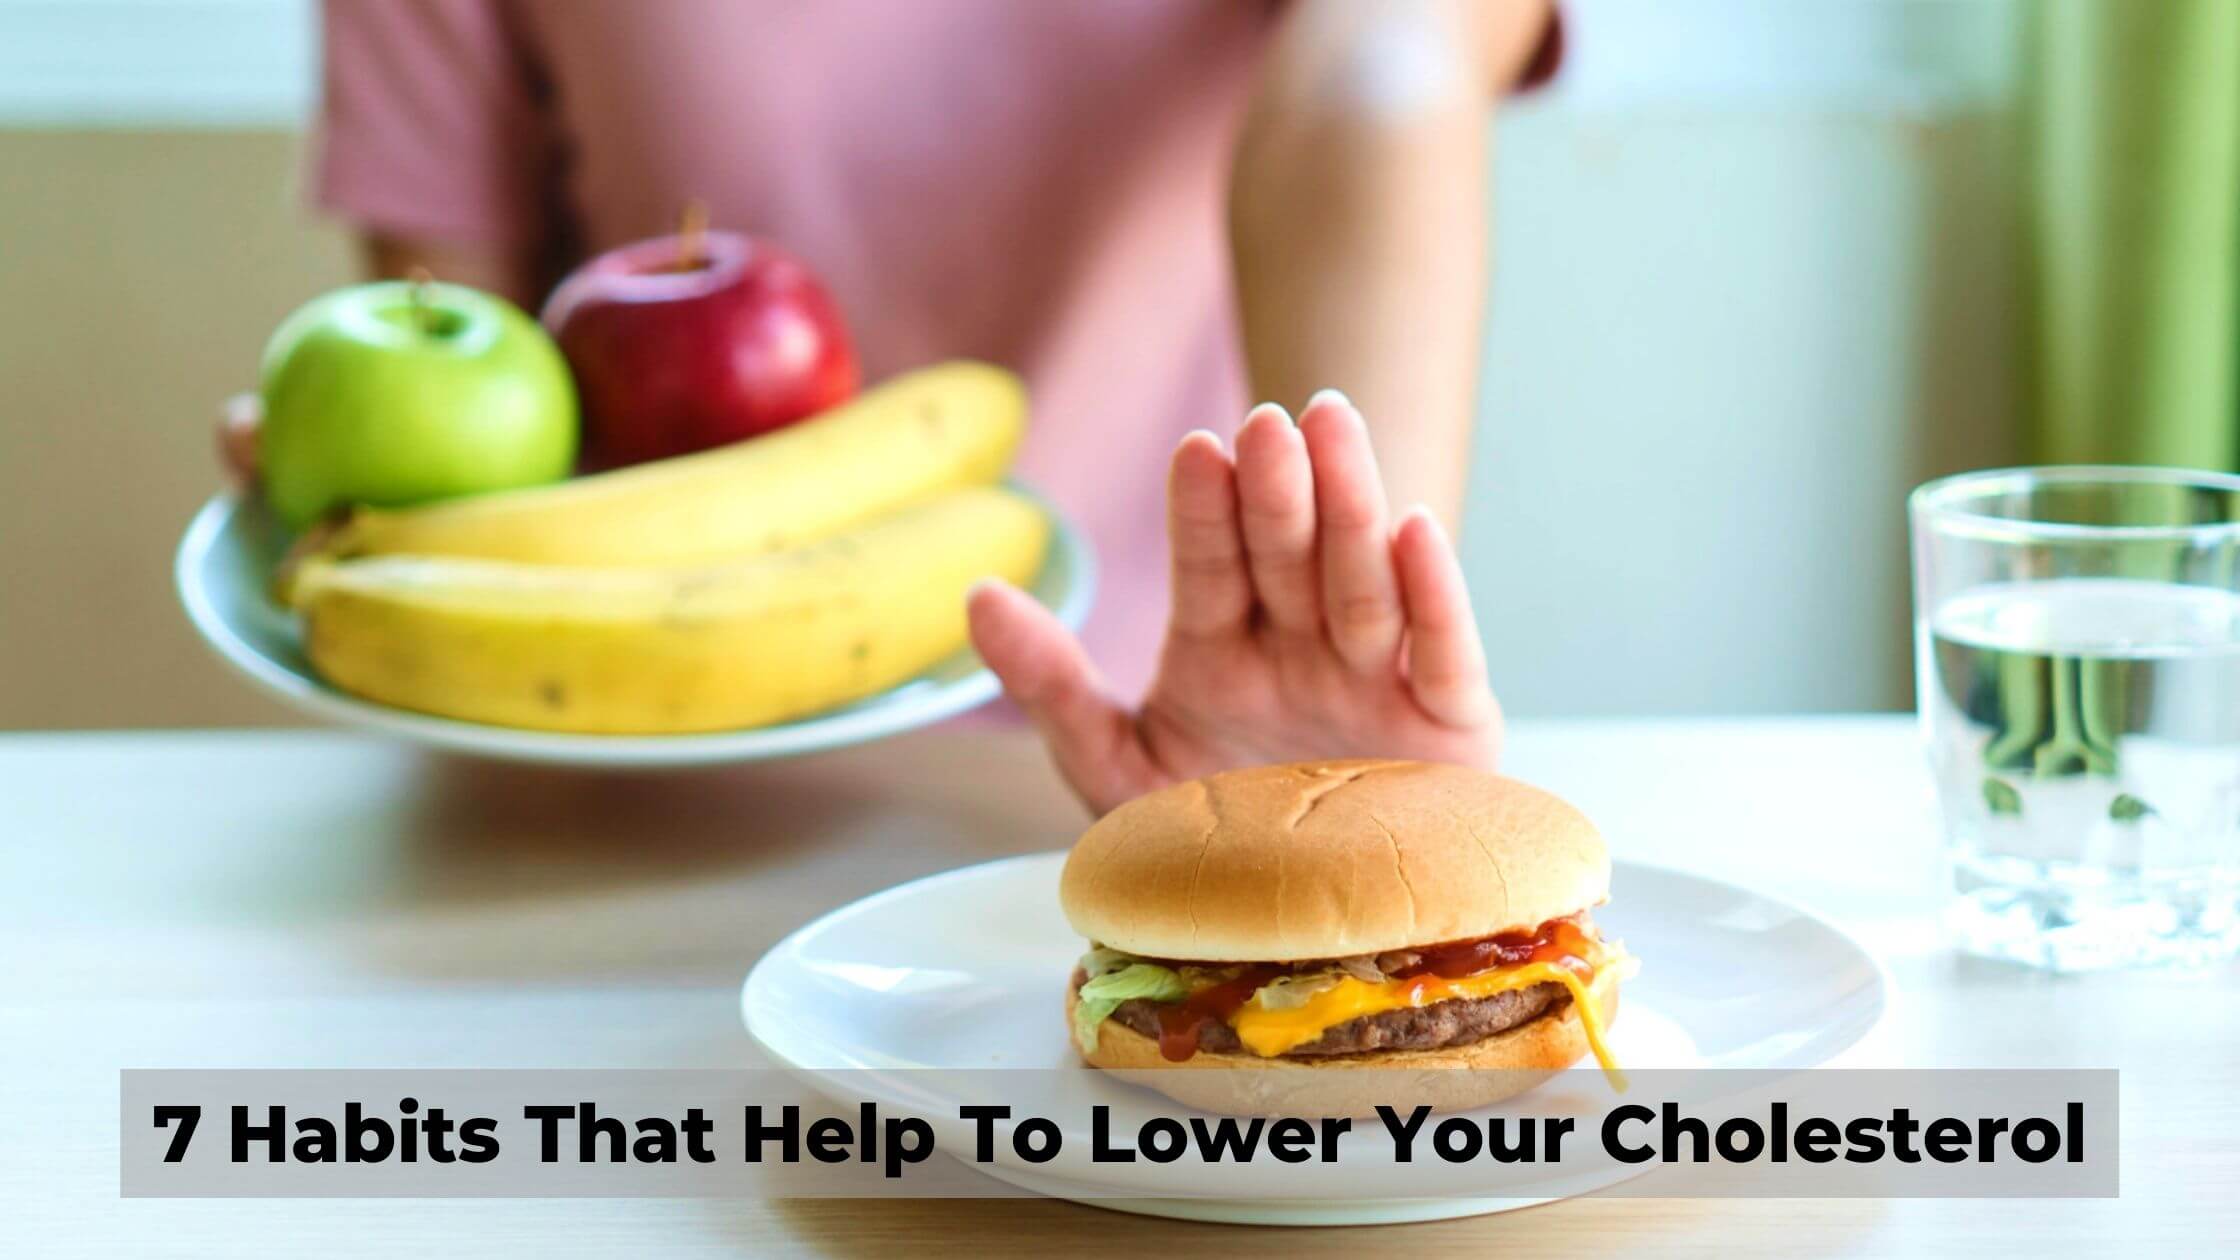 Habits That Help To Lower Your Cholesterol